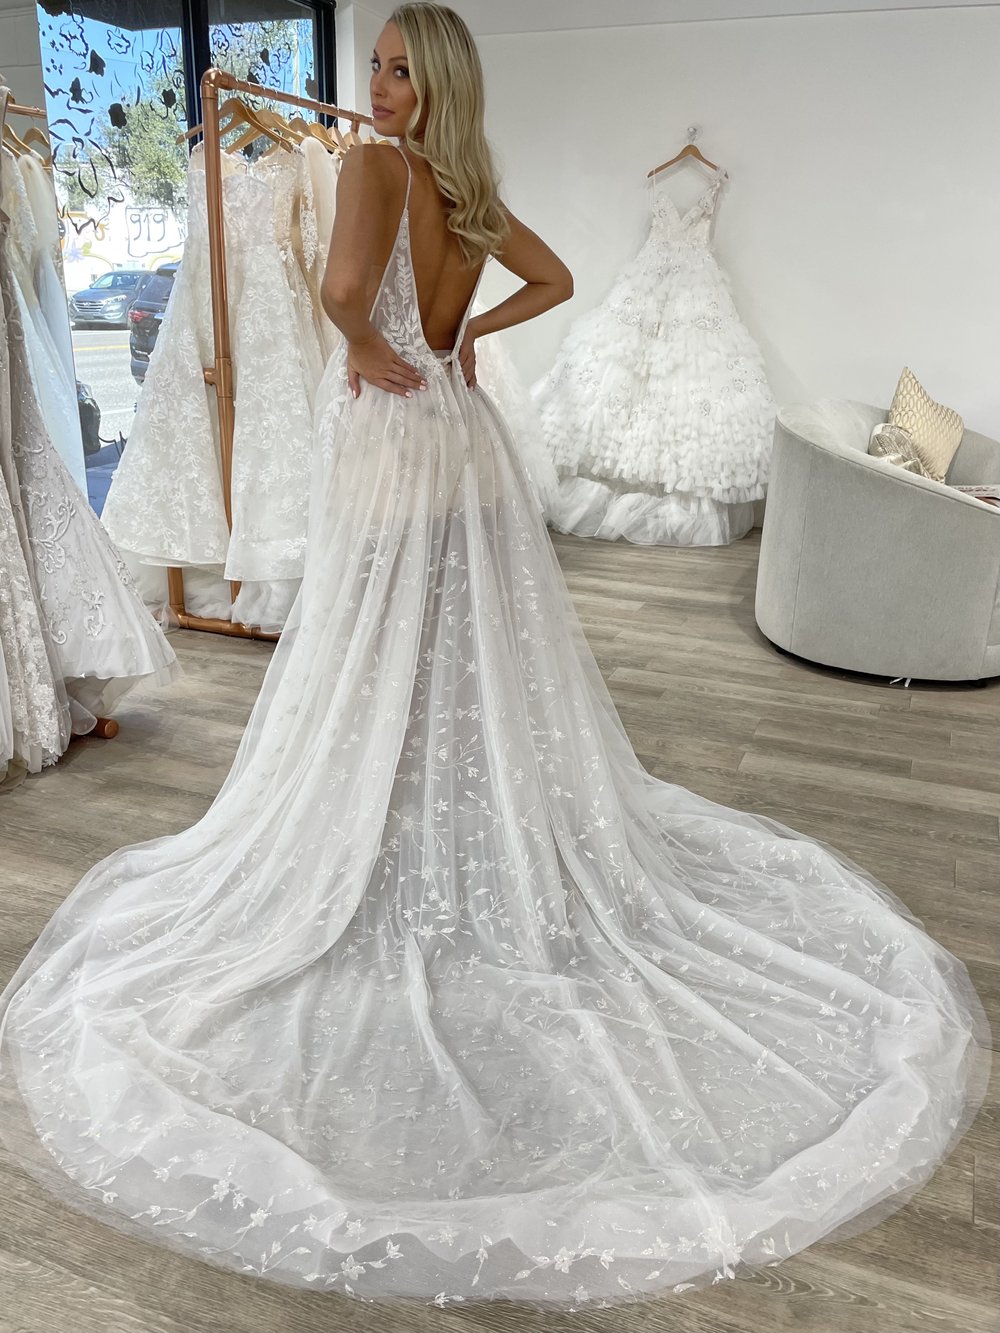 Nahal Pronovias Wedding Dress Available for Off The Rack | The Bridal Finery